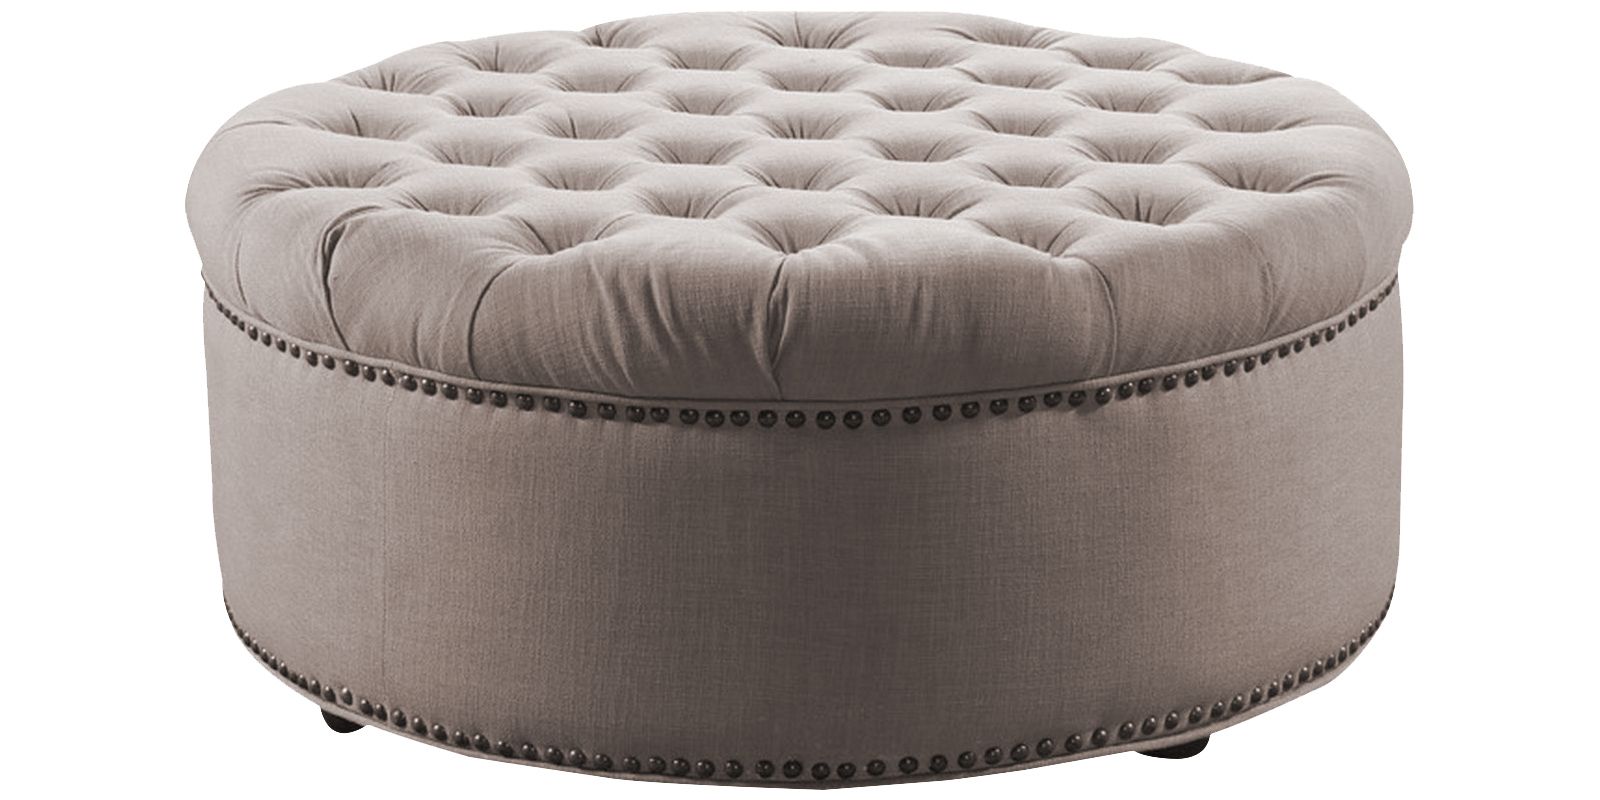 Stylish Tufted Round Ottoman In Beige Colour | Dreamzz Furniture For Beige Hemp Pouf Ottomans (View 3 of 20)